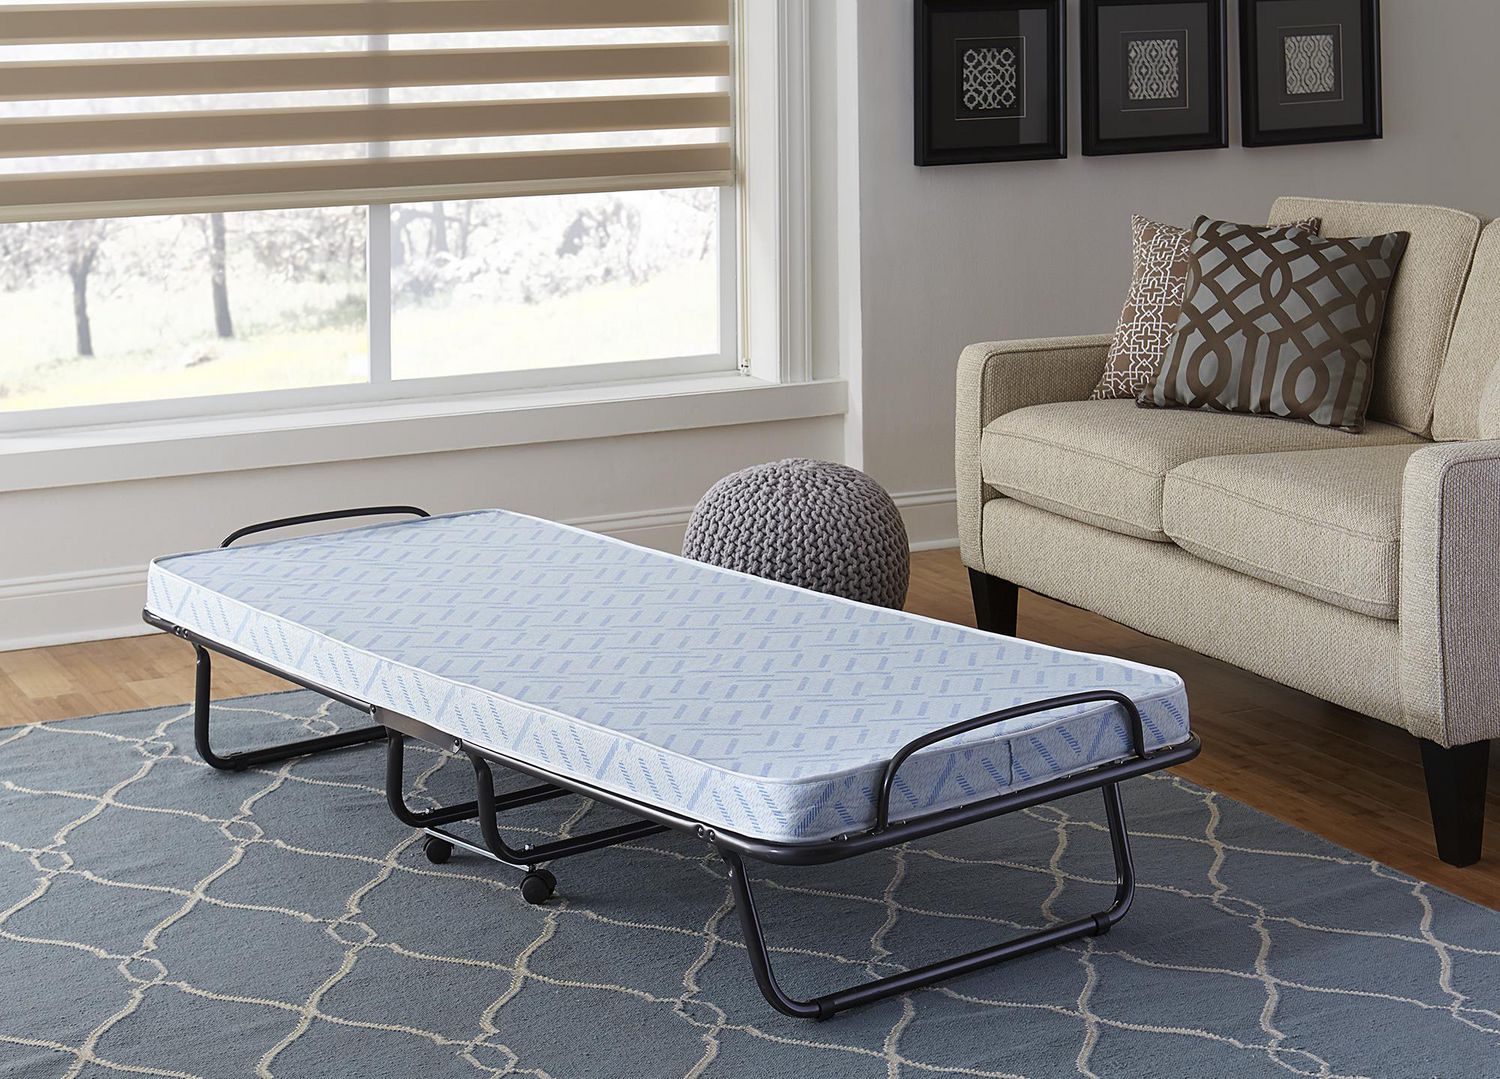 replacement mattress for folding guest bed